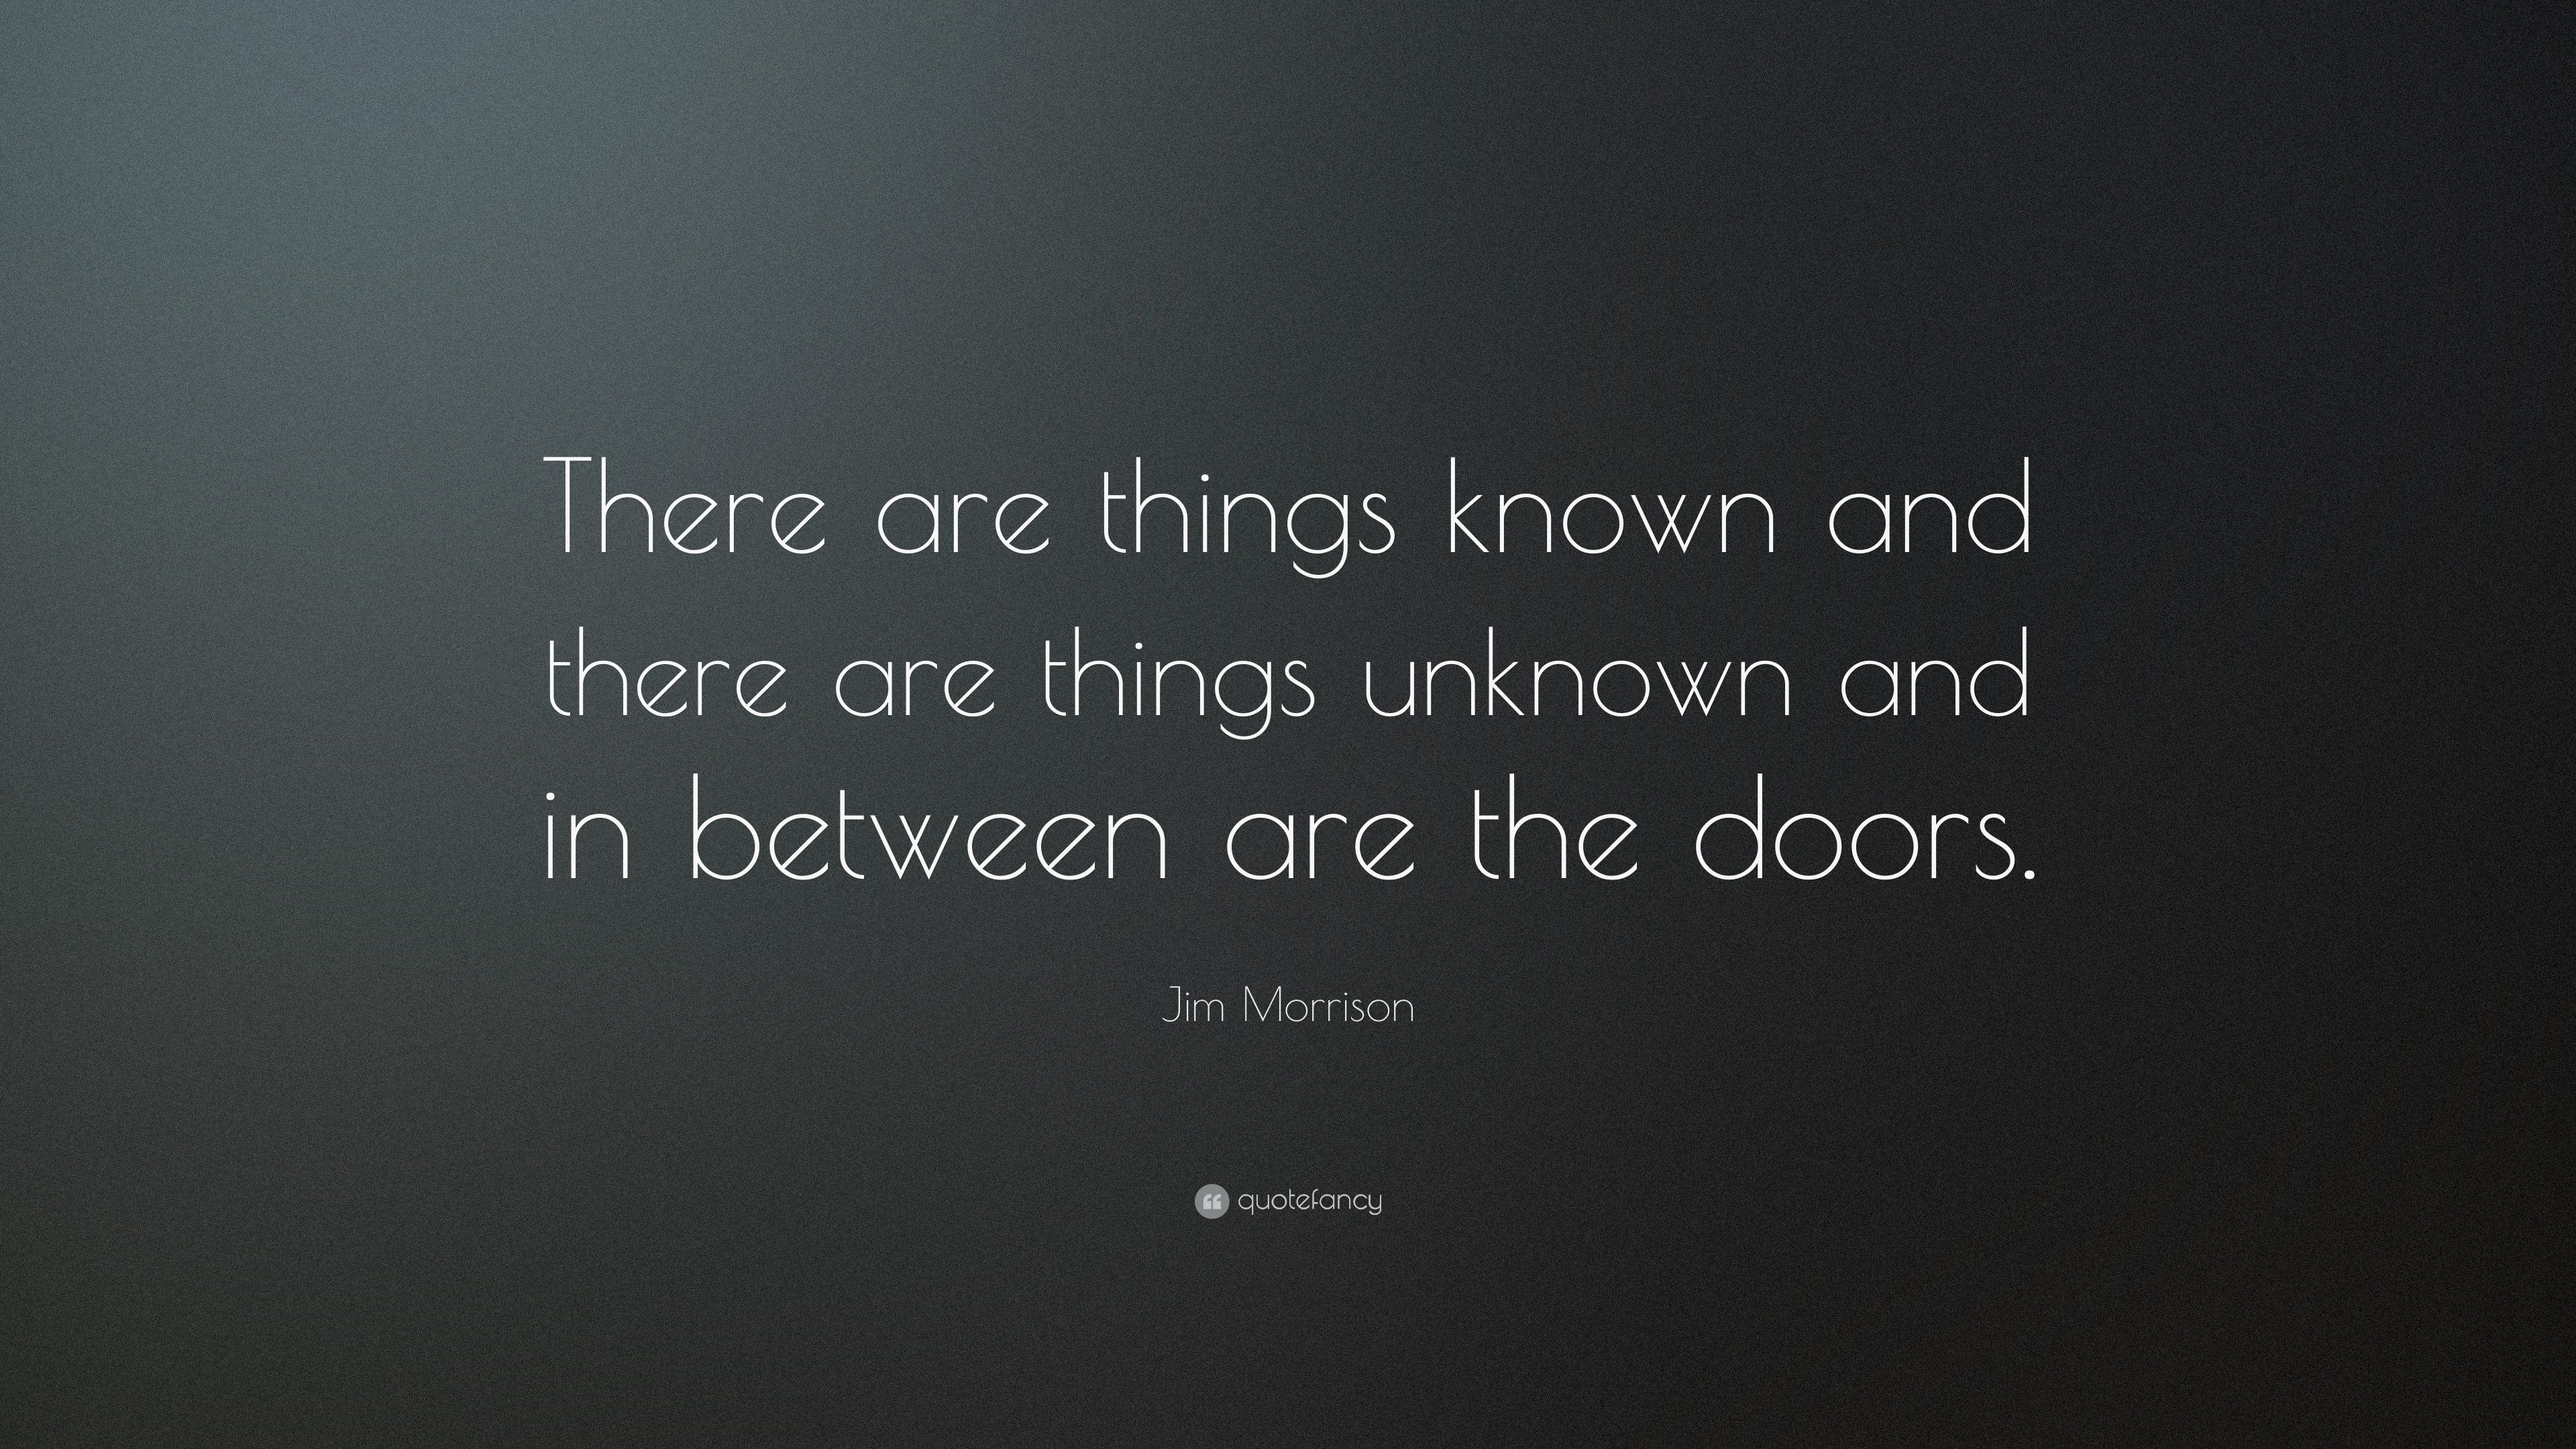 Jim Morrison Quote: “There are things known and there are things